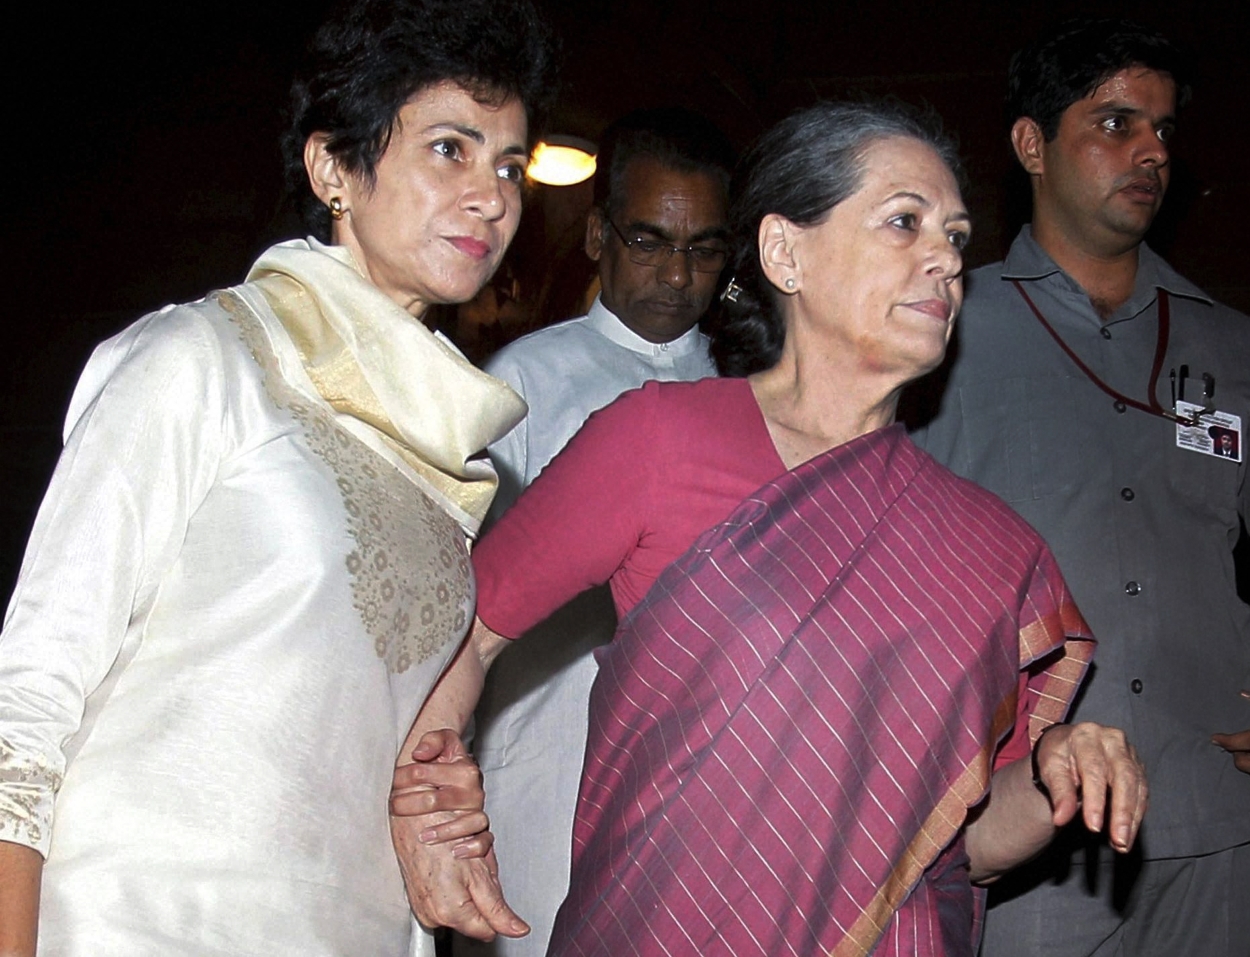 Indian Social Justice minister Kumari Selja (left) escorts chairwoman of ruling United Progressive Alliance and Congress party president Sonia Gandhi, who has fallen ill.